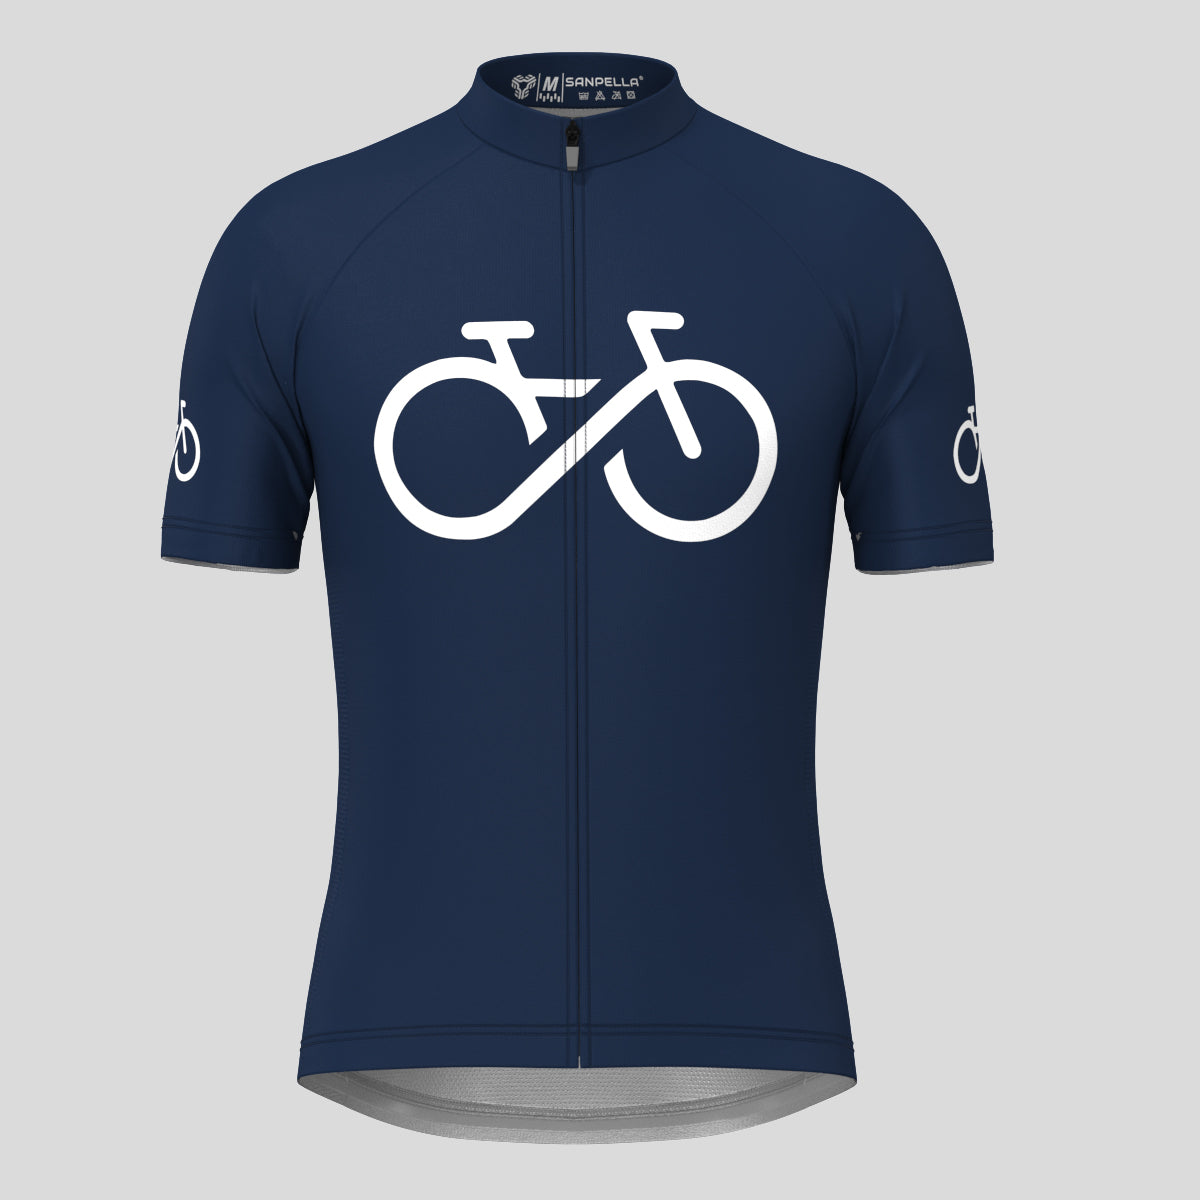 Bike Forever Men's Cycling Jersey -Navy